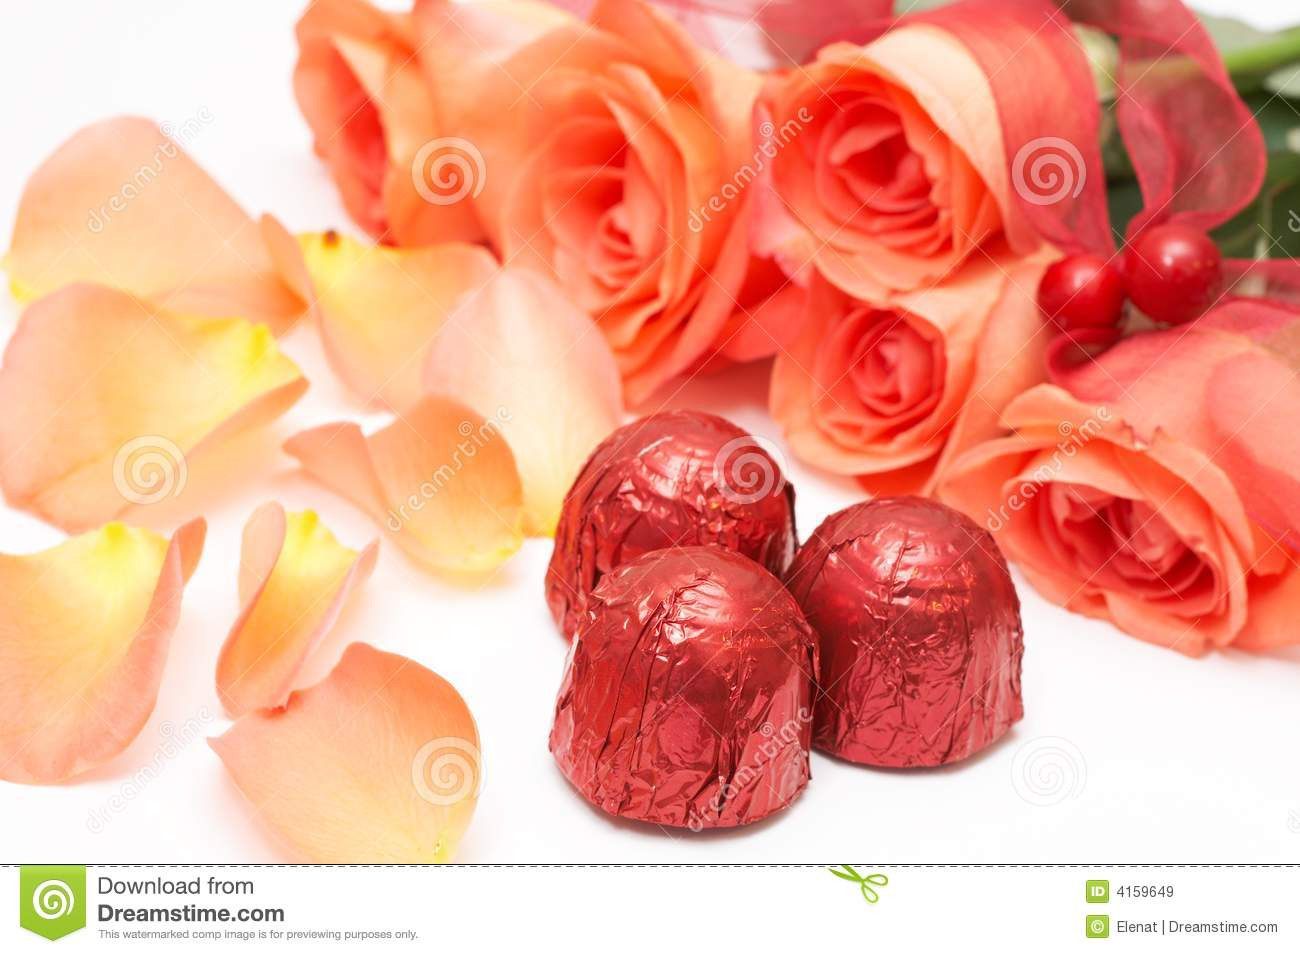 28 Unique Proflowers 19.99 Free Vase 2024 free download proflowers 19 99 free vase of image seo all 2 valentines roses post 12 throughout valentines chocolates roses 4159649